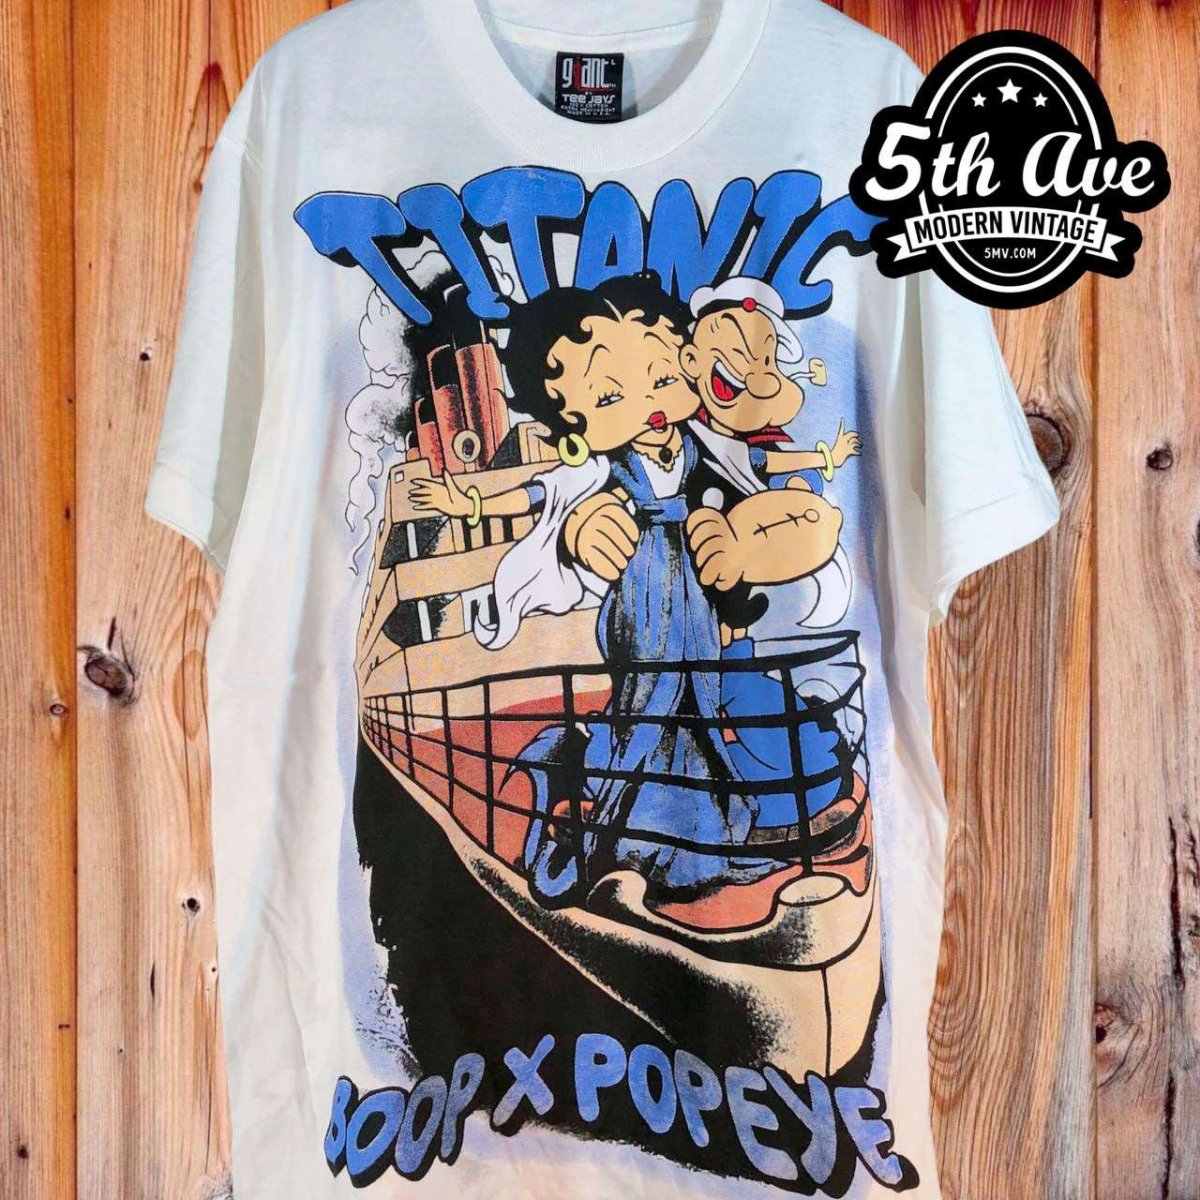 Betty Boop x Popeye x Titanic - AOP all over print New Vintage Animation T shirt - Vintage Band Shirts